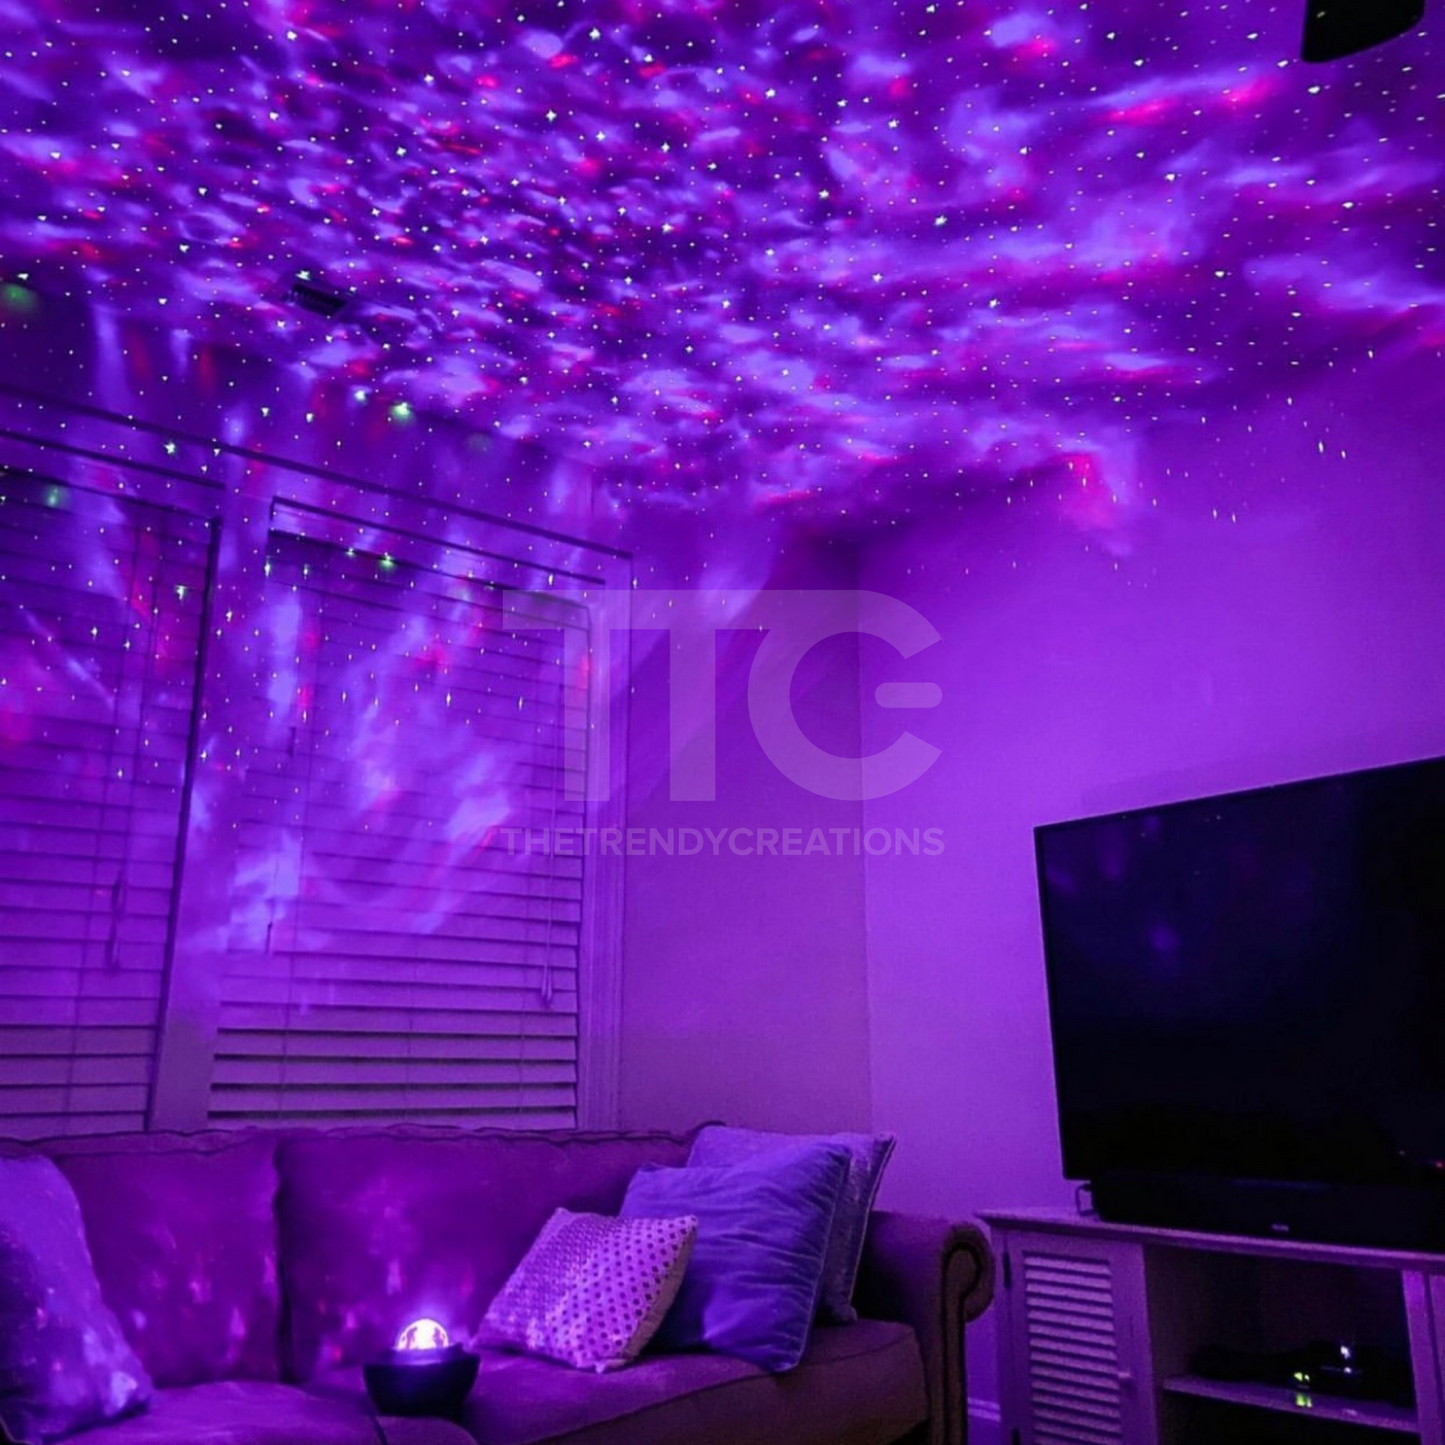 Galaxy Projector By The Trendy Creations In Pakistan